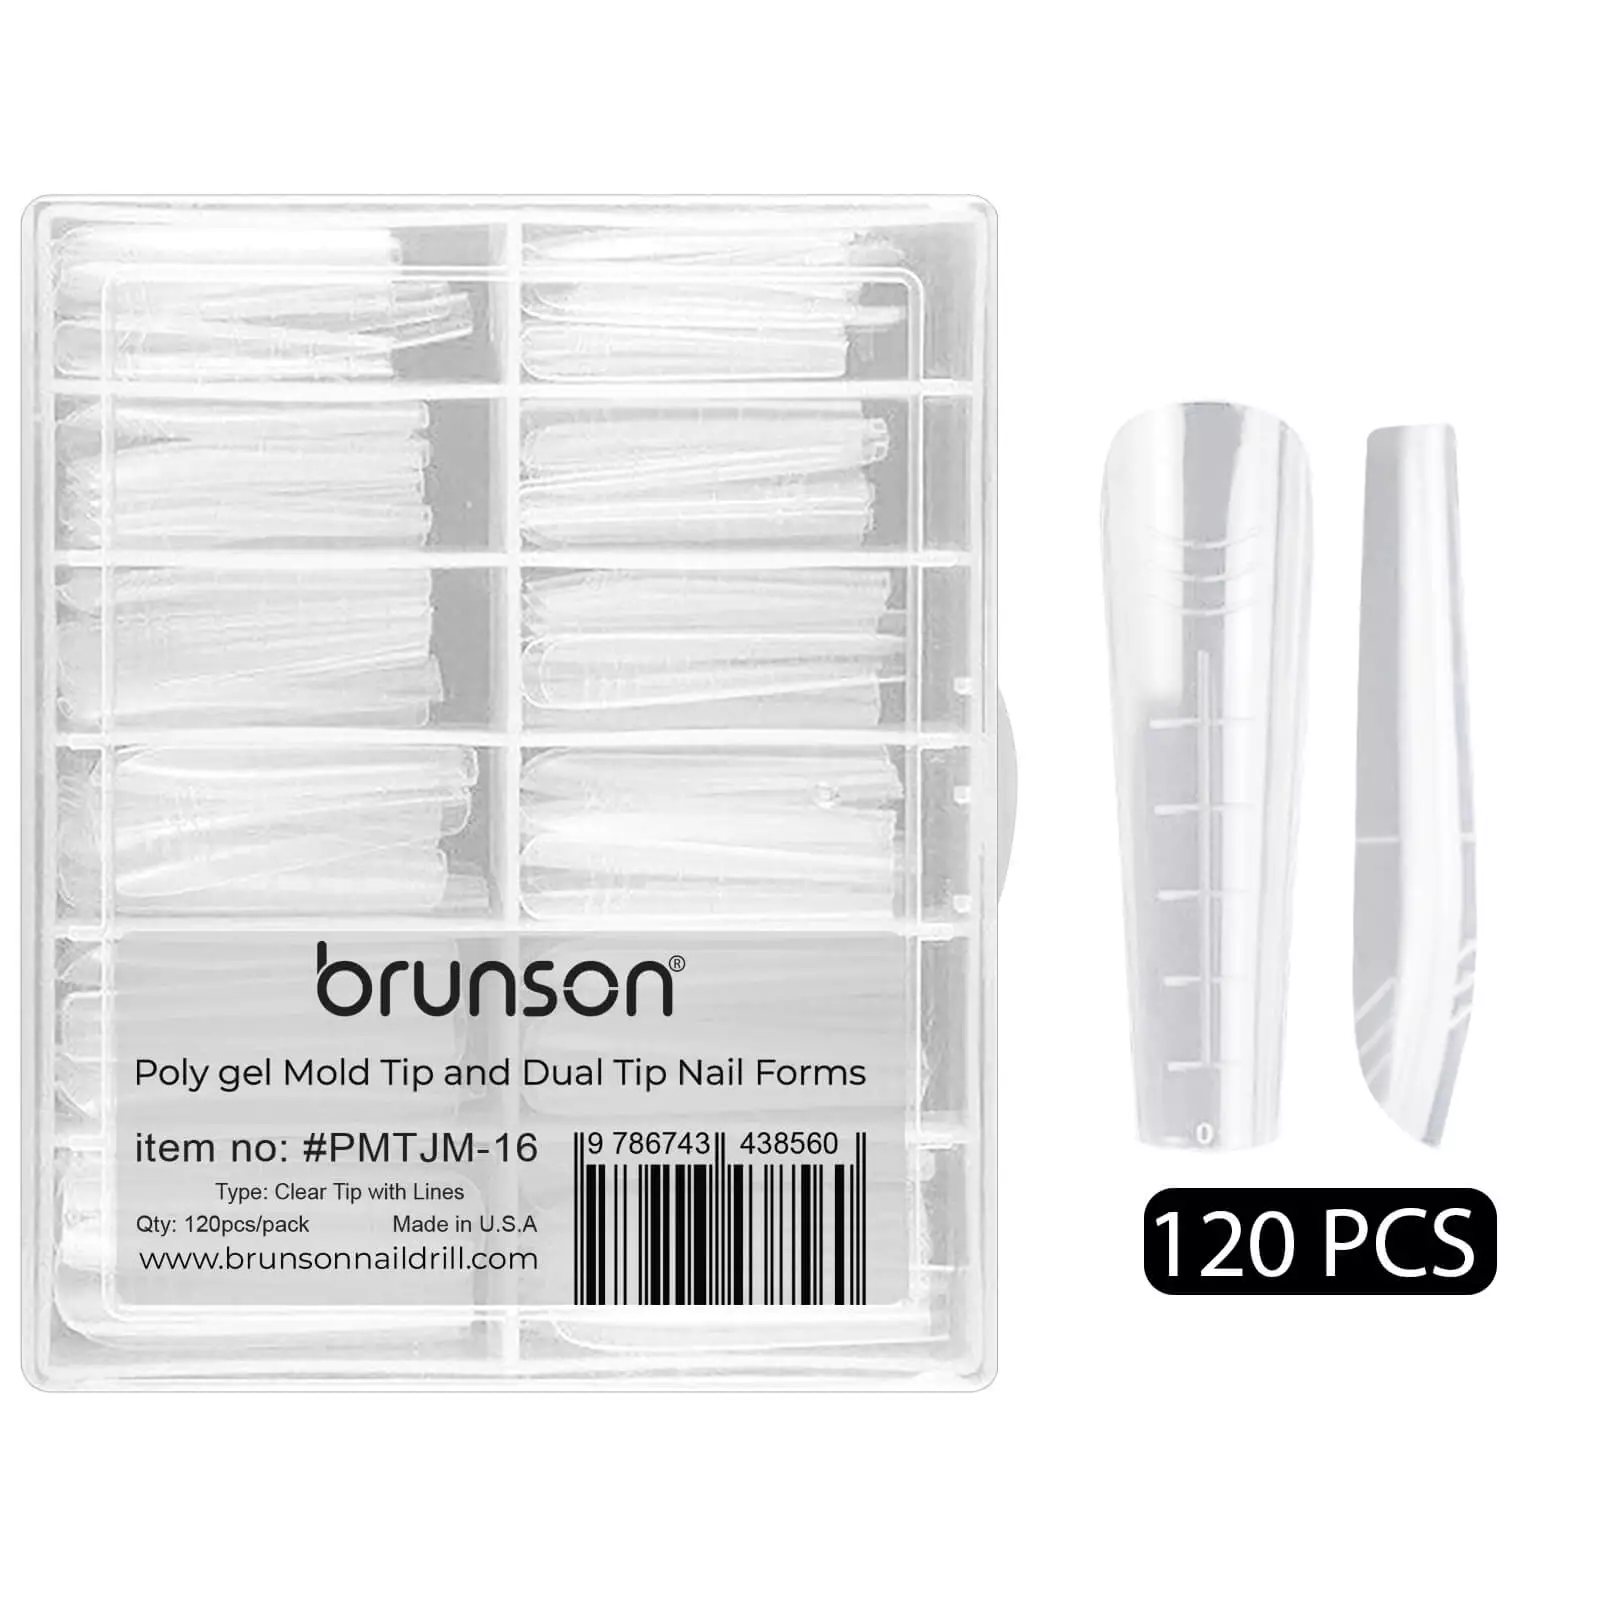 Poly-Gel-Mold-Tip-and-Dual-Tip-Nail-Forms-PMTJM-16-Brunson-1